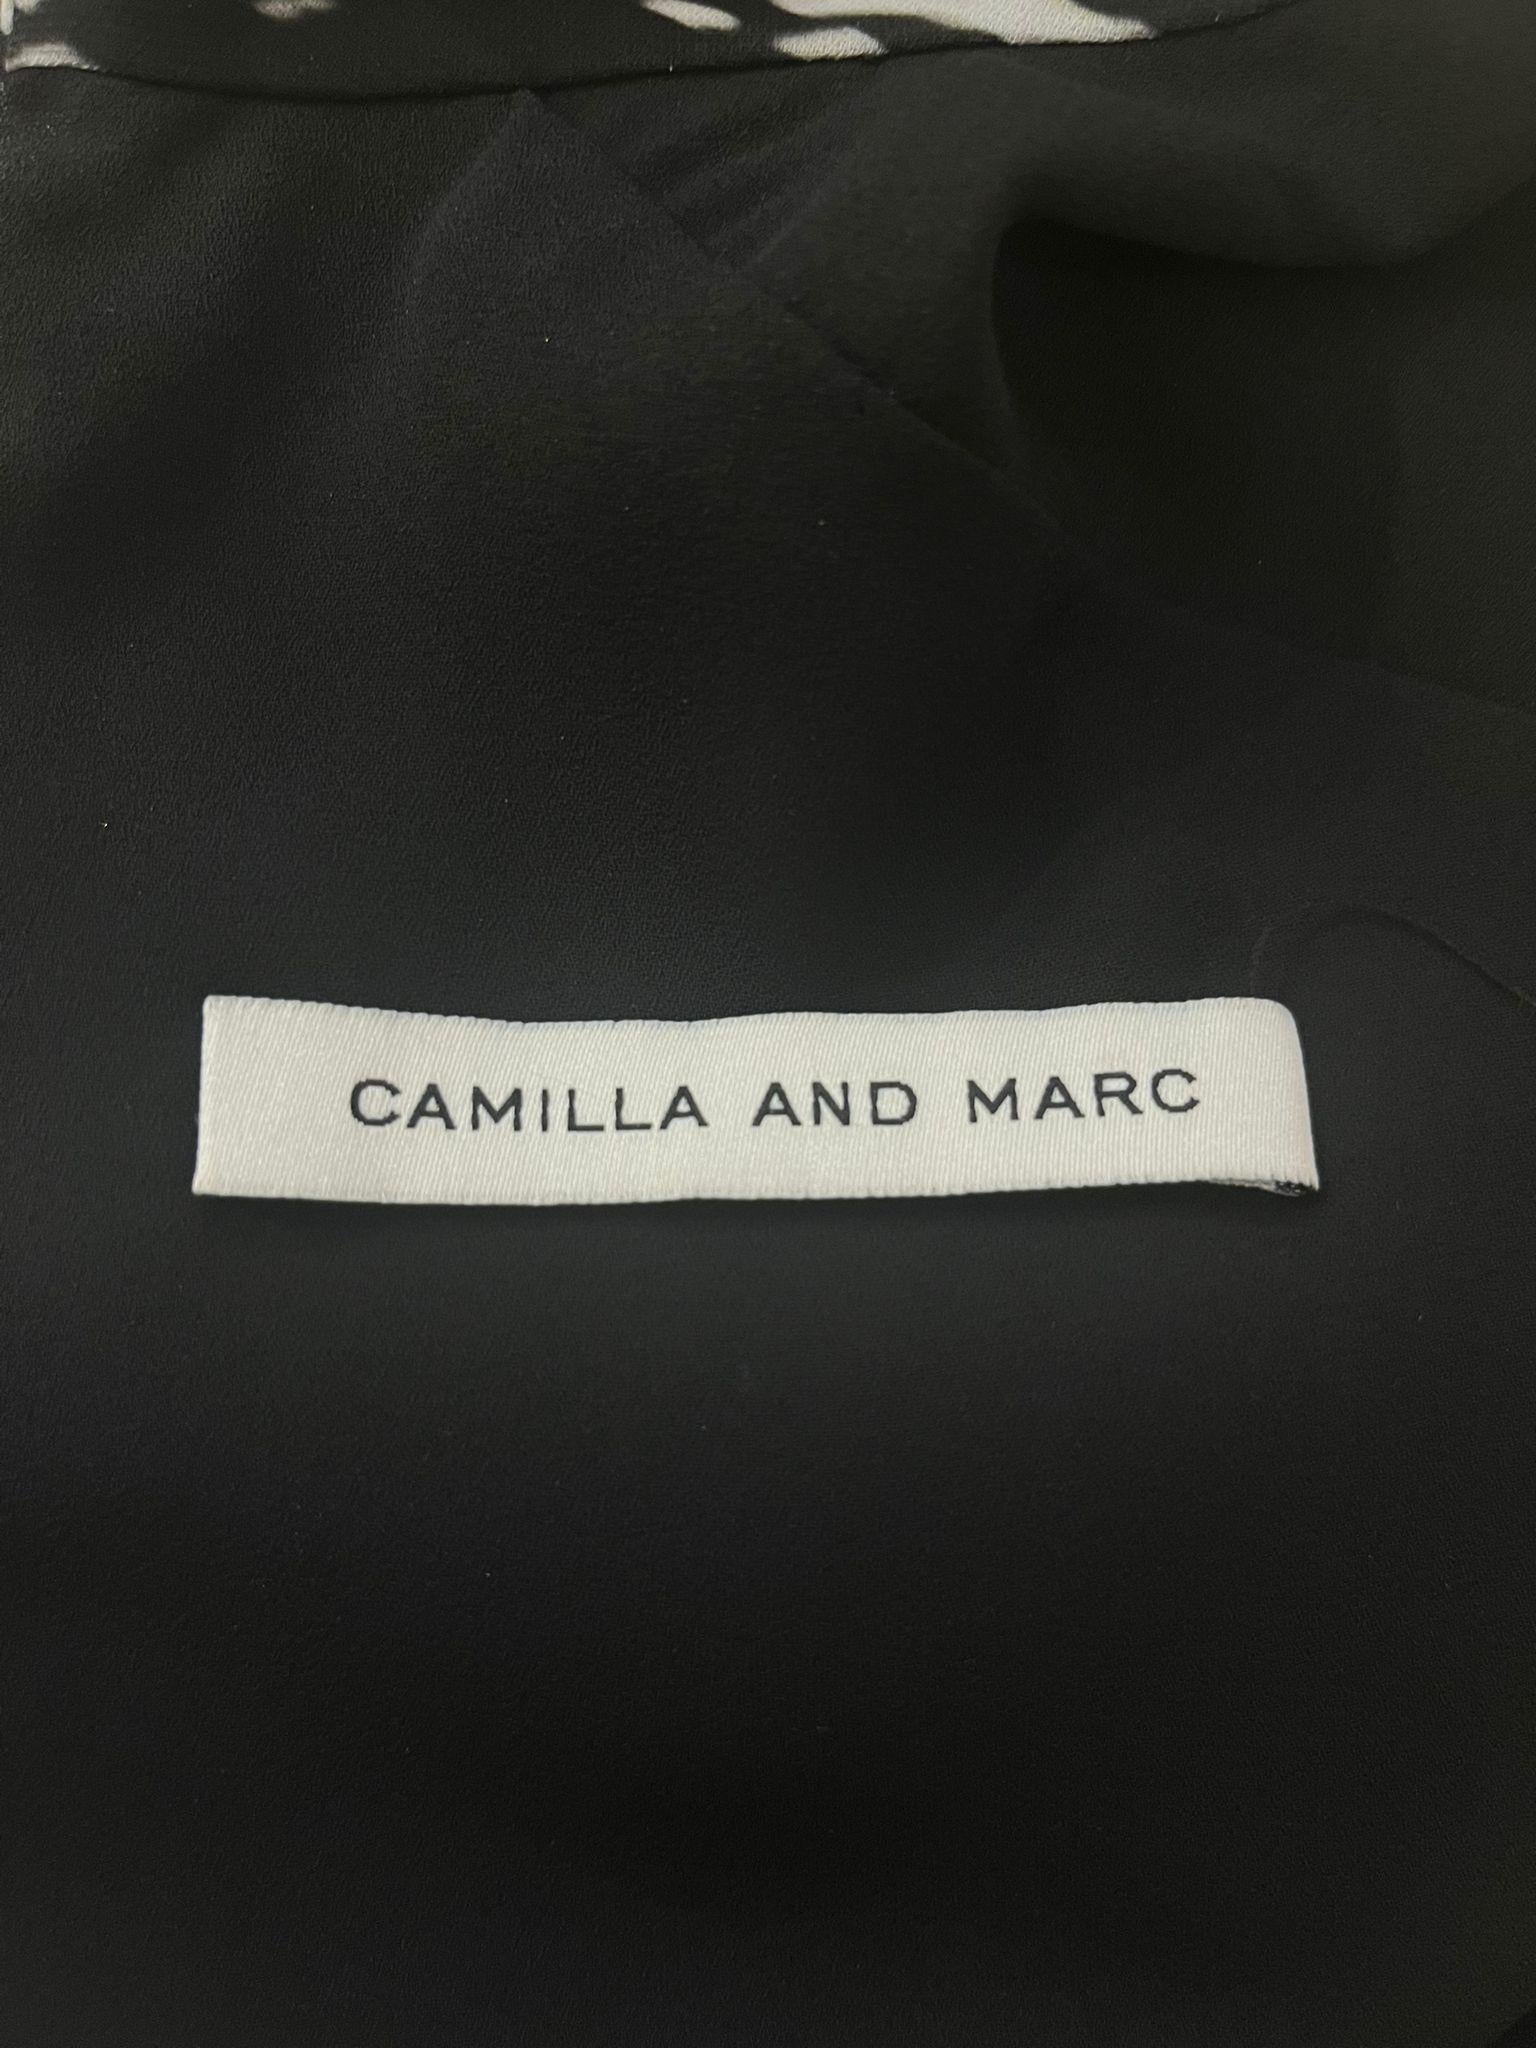 Camilla And Marc Pleated Dress For Sale 1